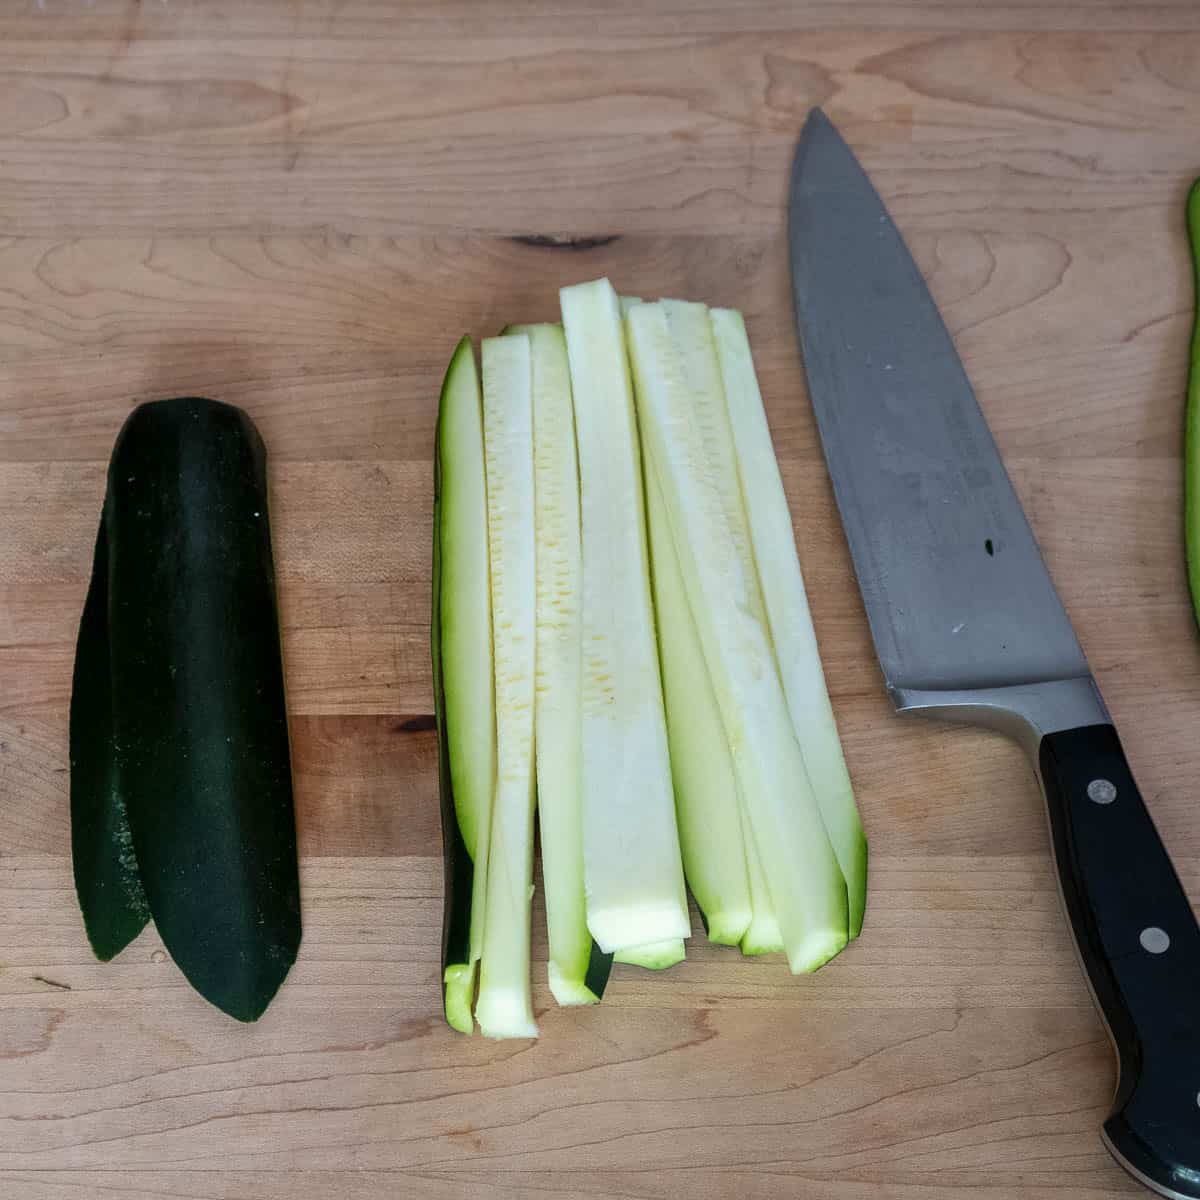 Zucchini cut into batons ready for dicing.